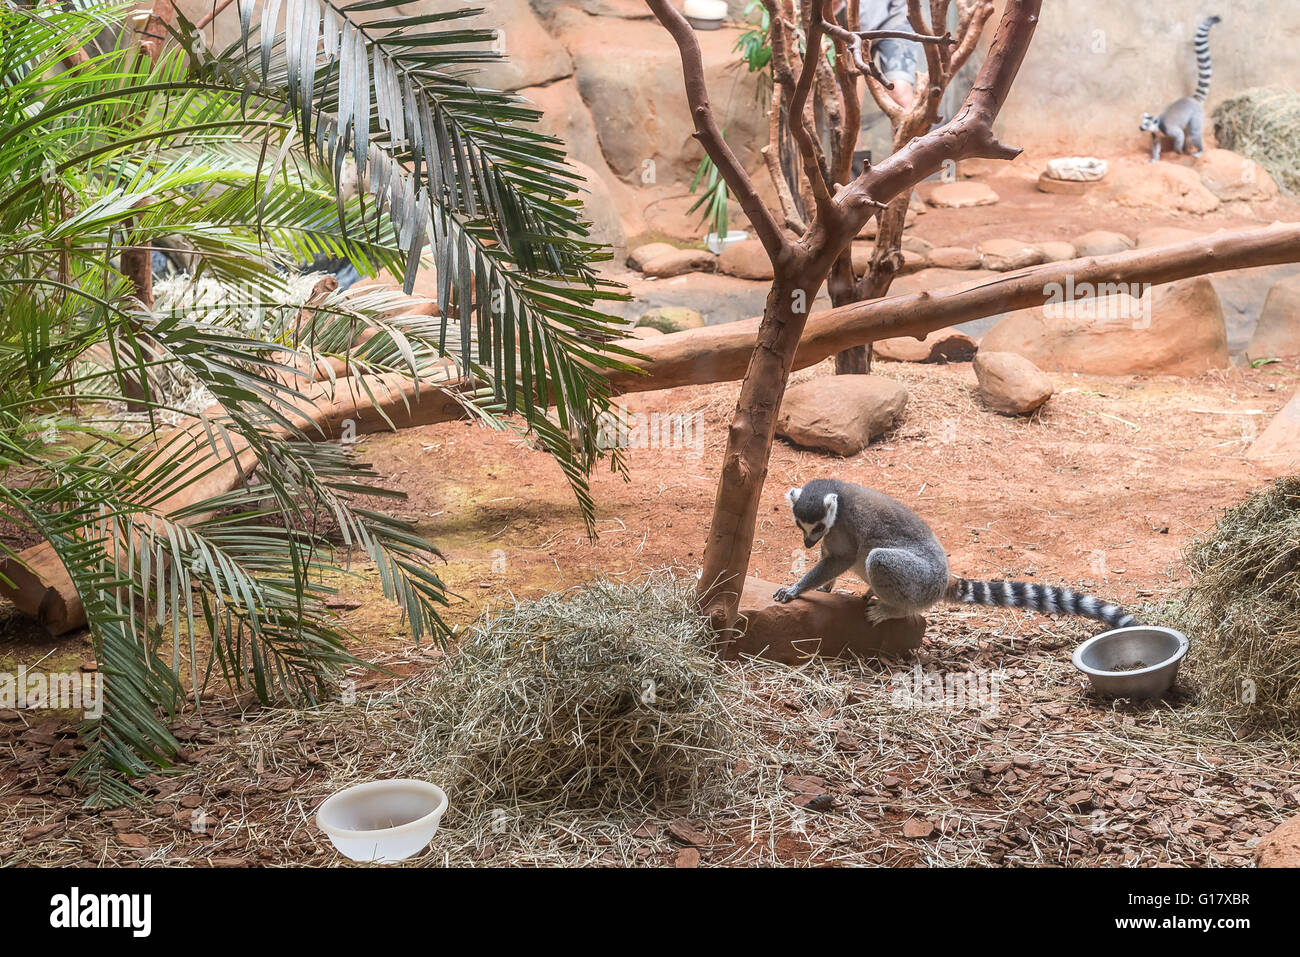 Sao Paulo, Brazil, jan 16, 2016: The ring tailed lemur (lemur catta) eating and sitting by a tree. Stock Photo